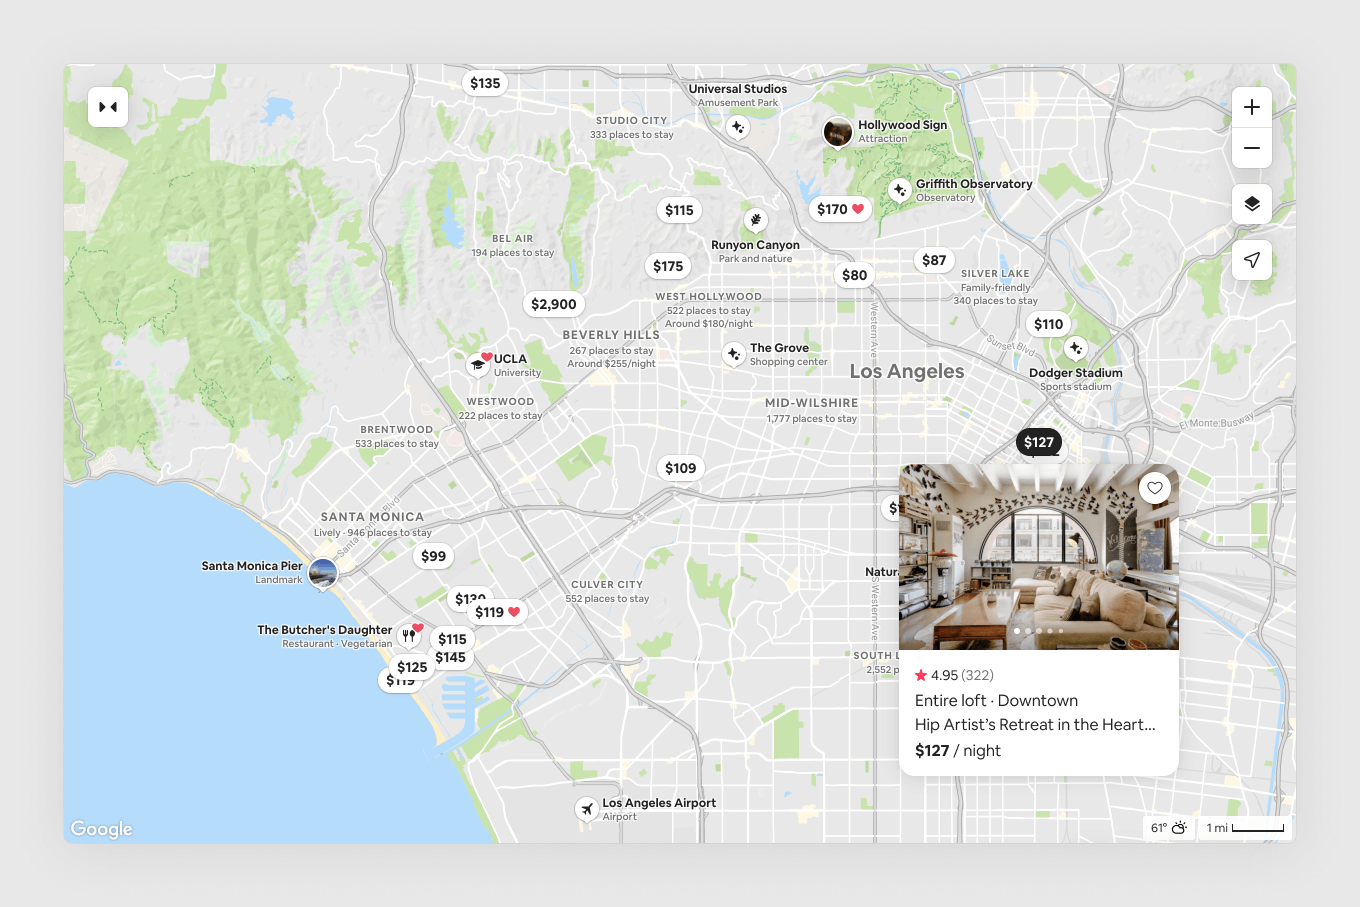 Map of Los Angeles showing location of Airbnb listings, points of interest, and neighborhood names